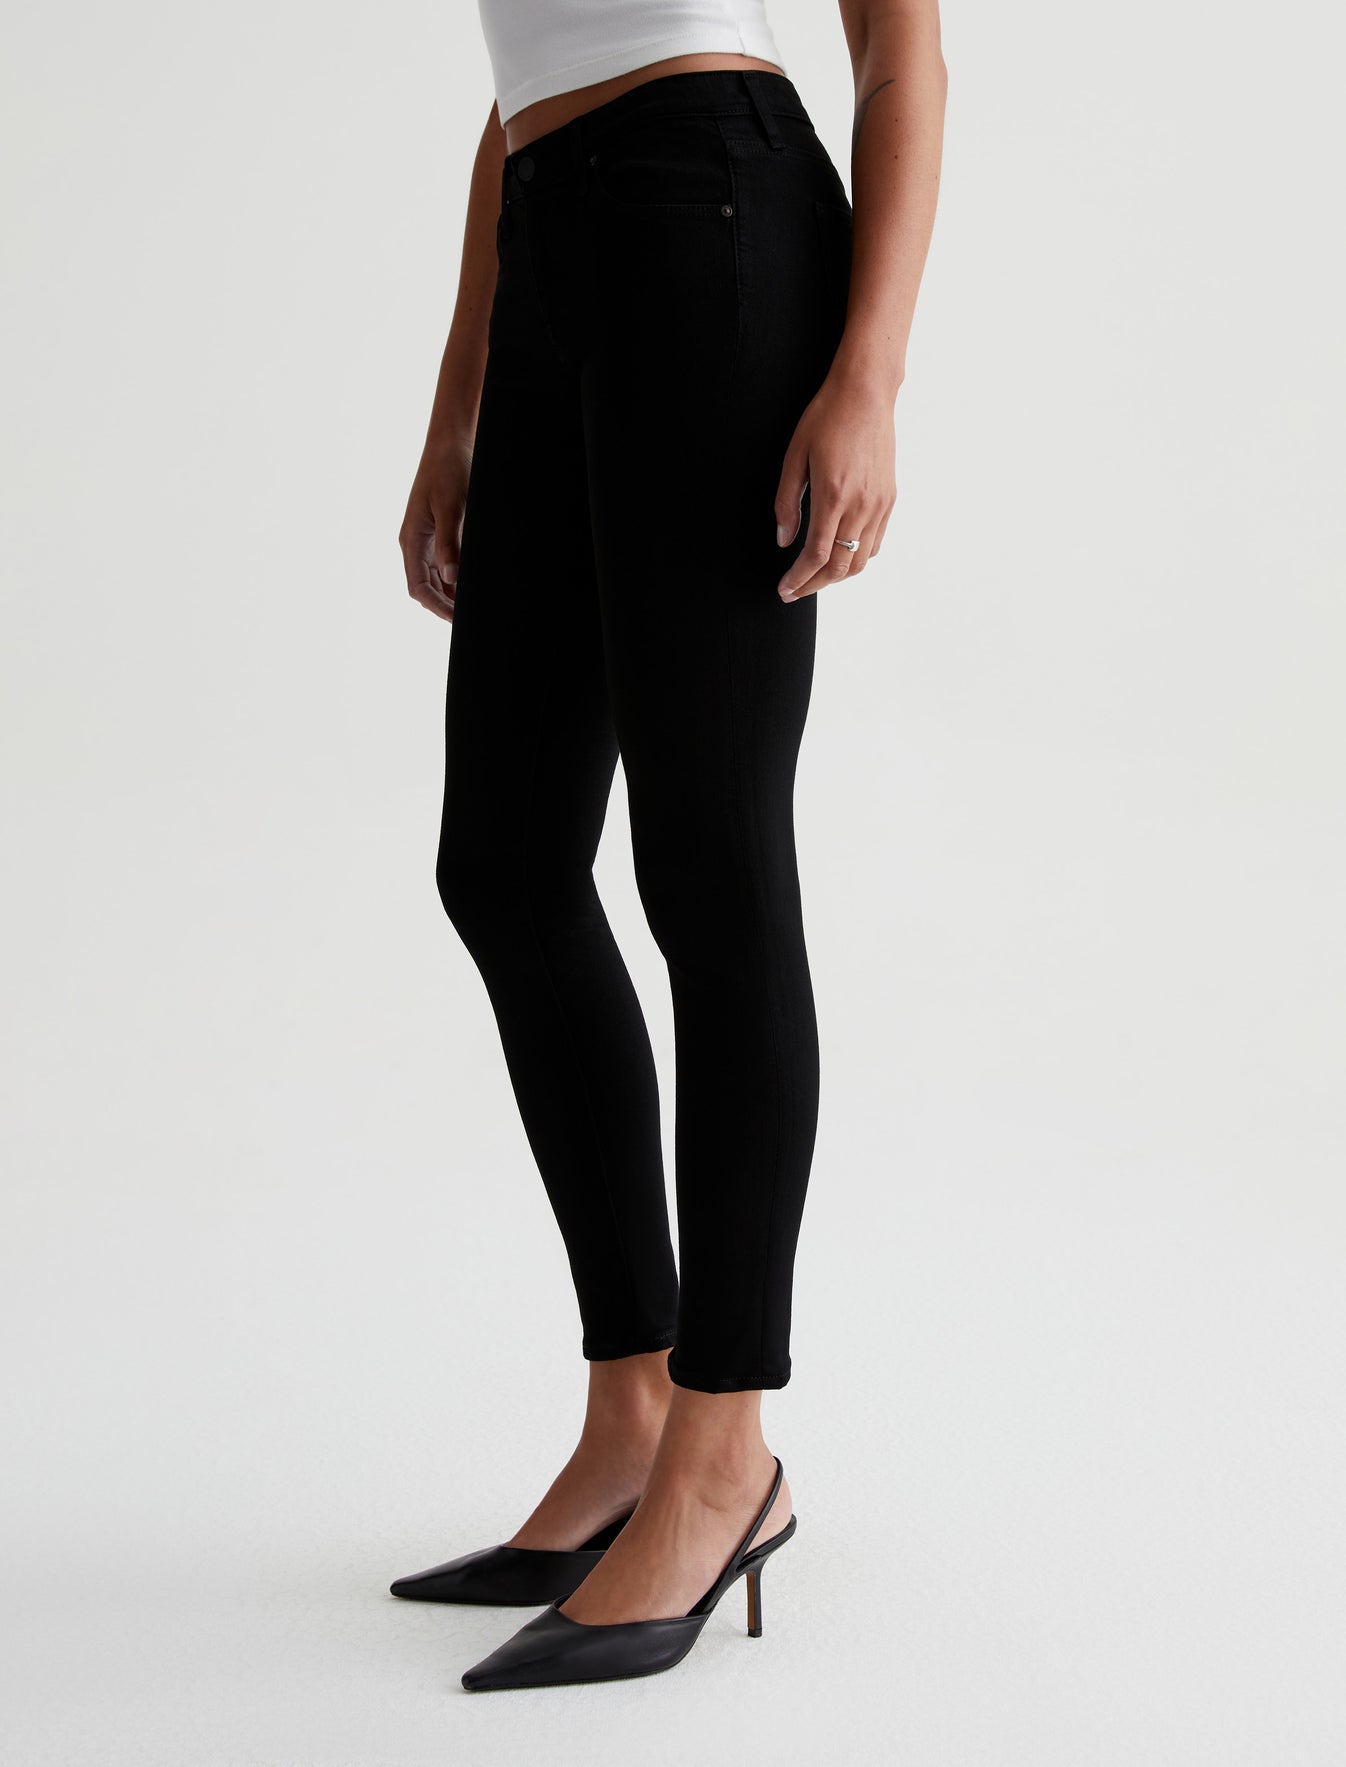 Women's High-Rise Skinny Ankle Pants - A New Day™ Black 6